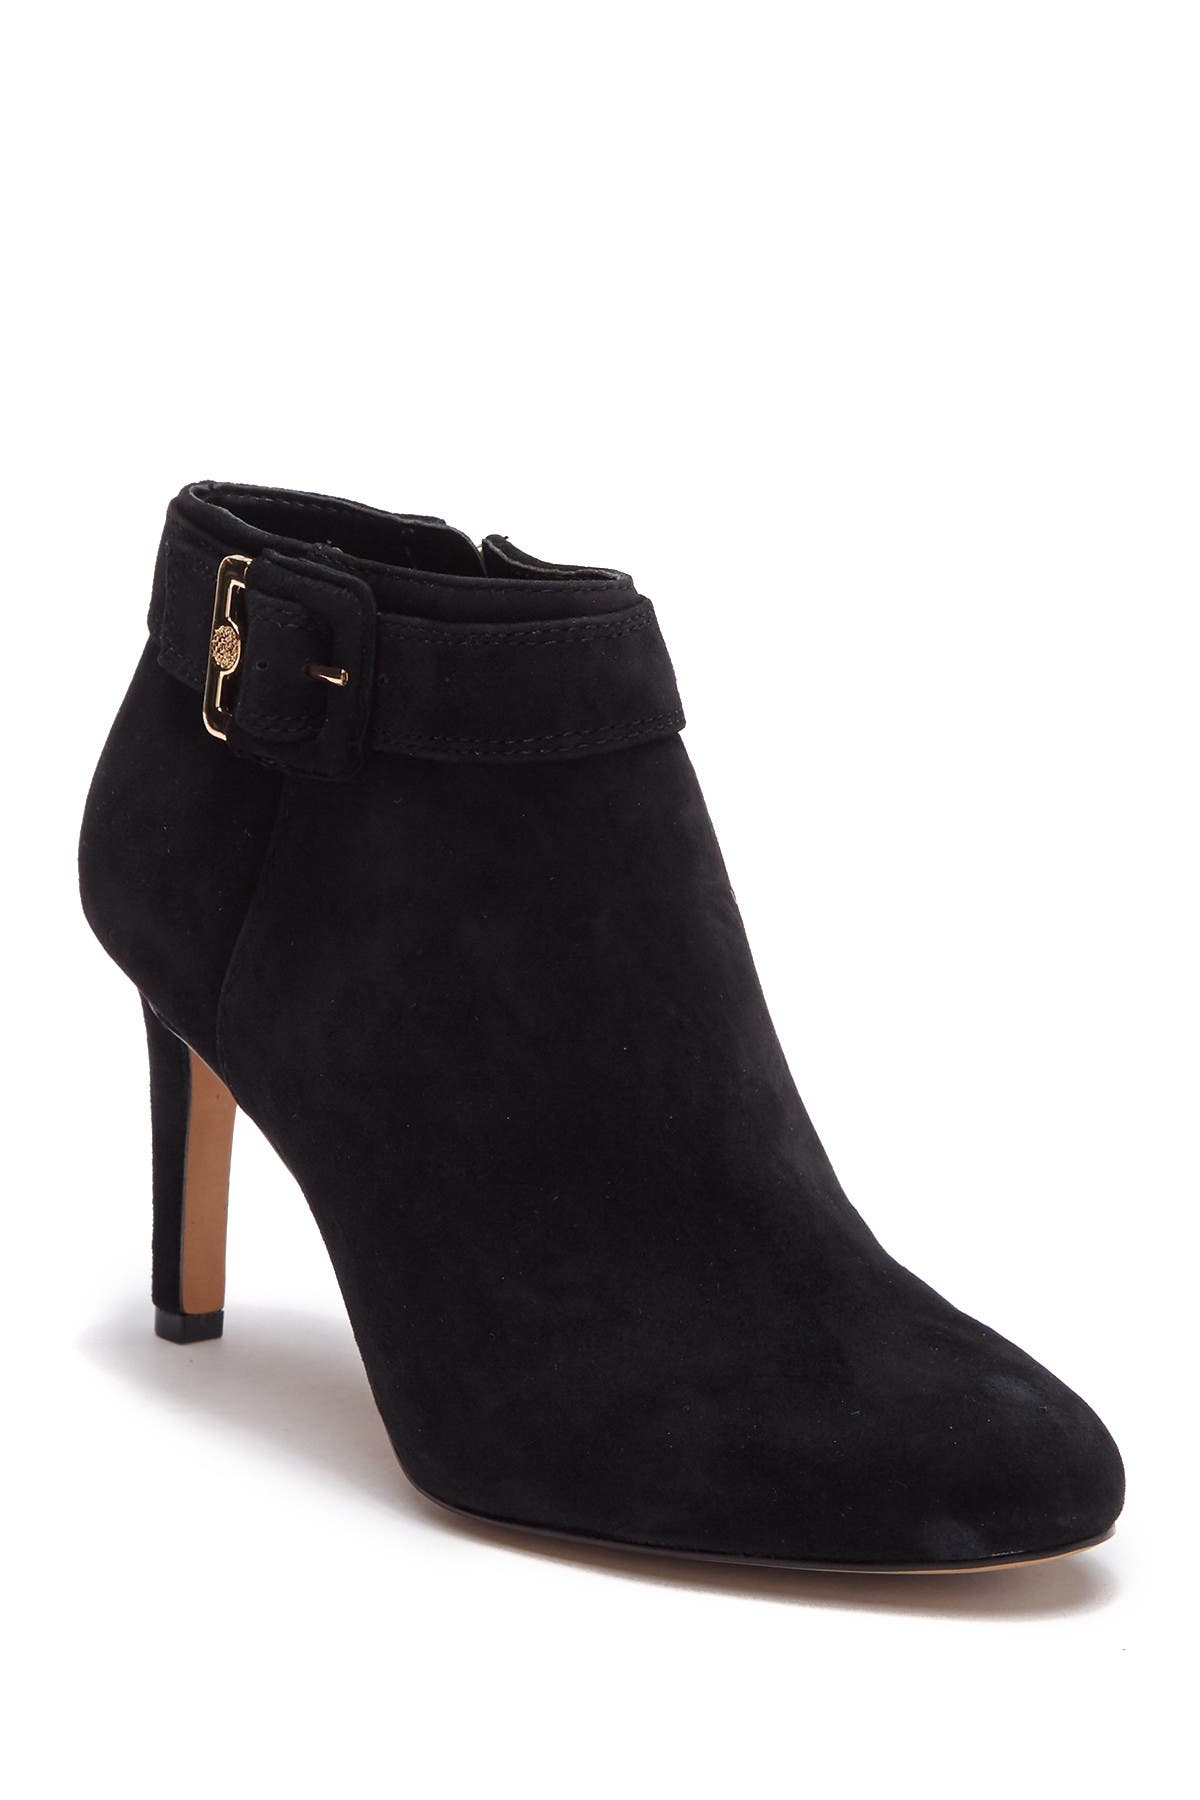 vince camuto chrissa leather bootie